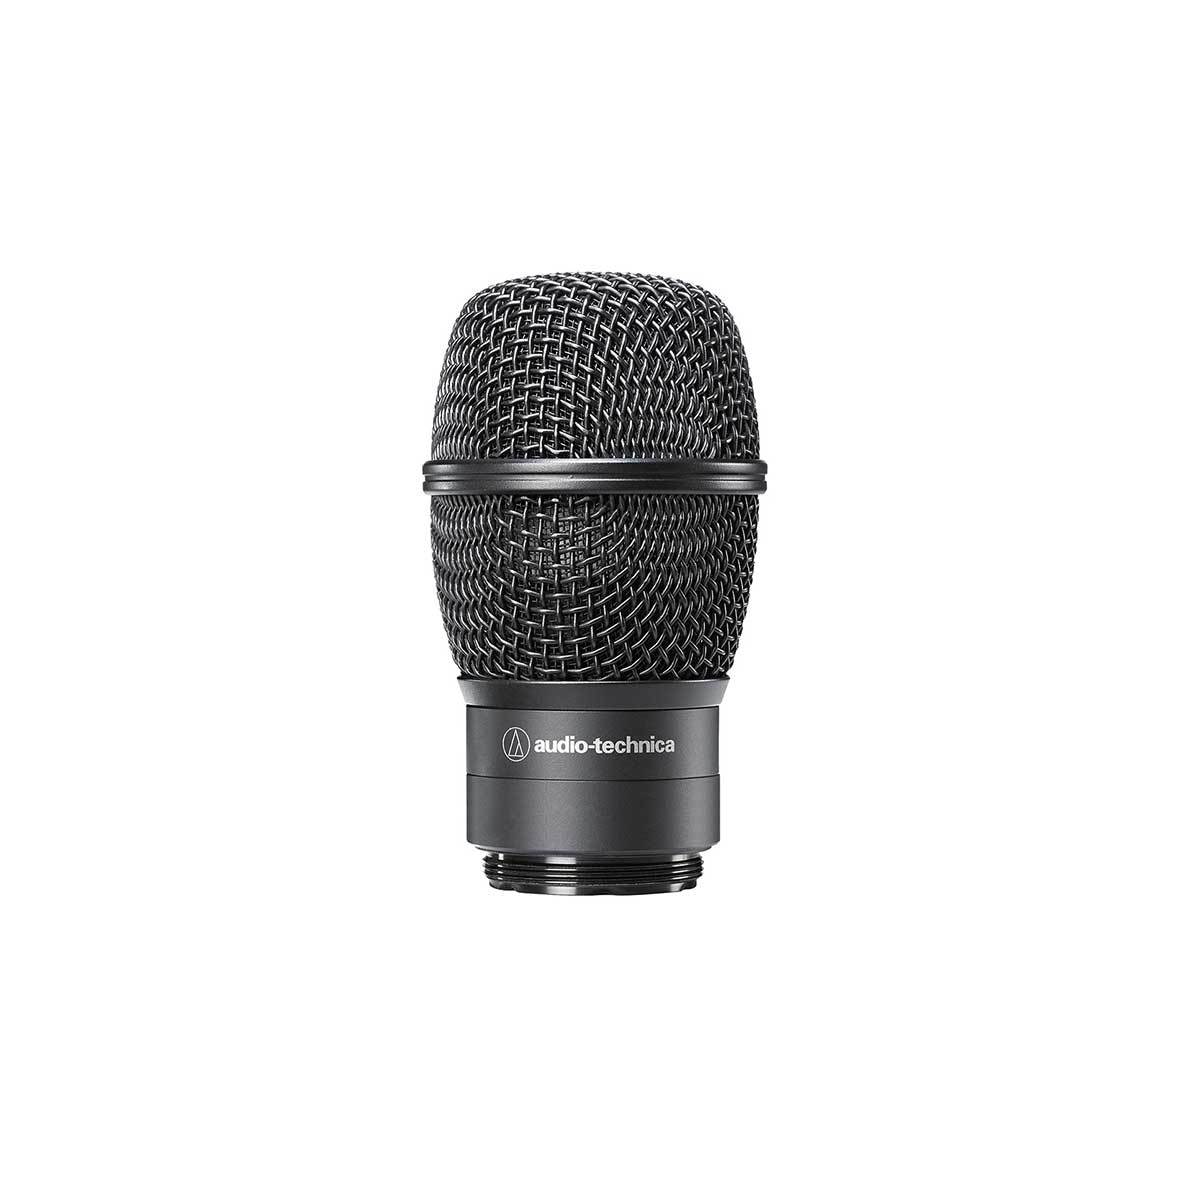 Wireless Systems - Audio-Technica ATW-C710 Interchangeable Cardioid Condenser Microphone Capsule